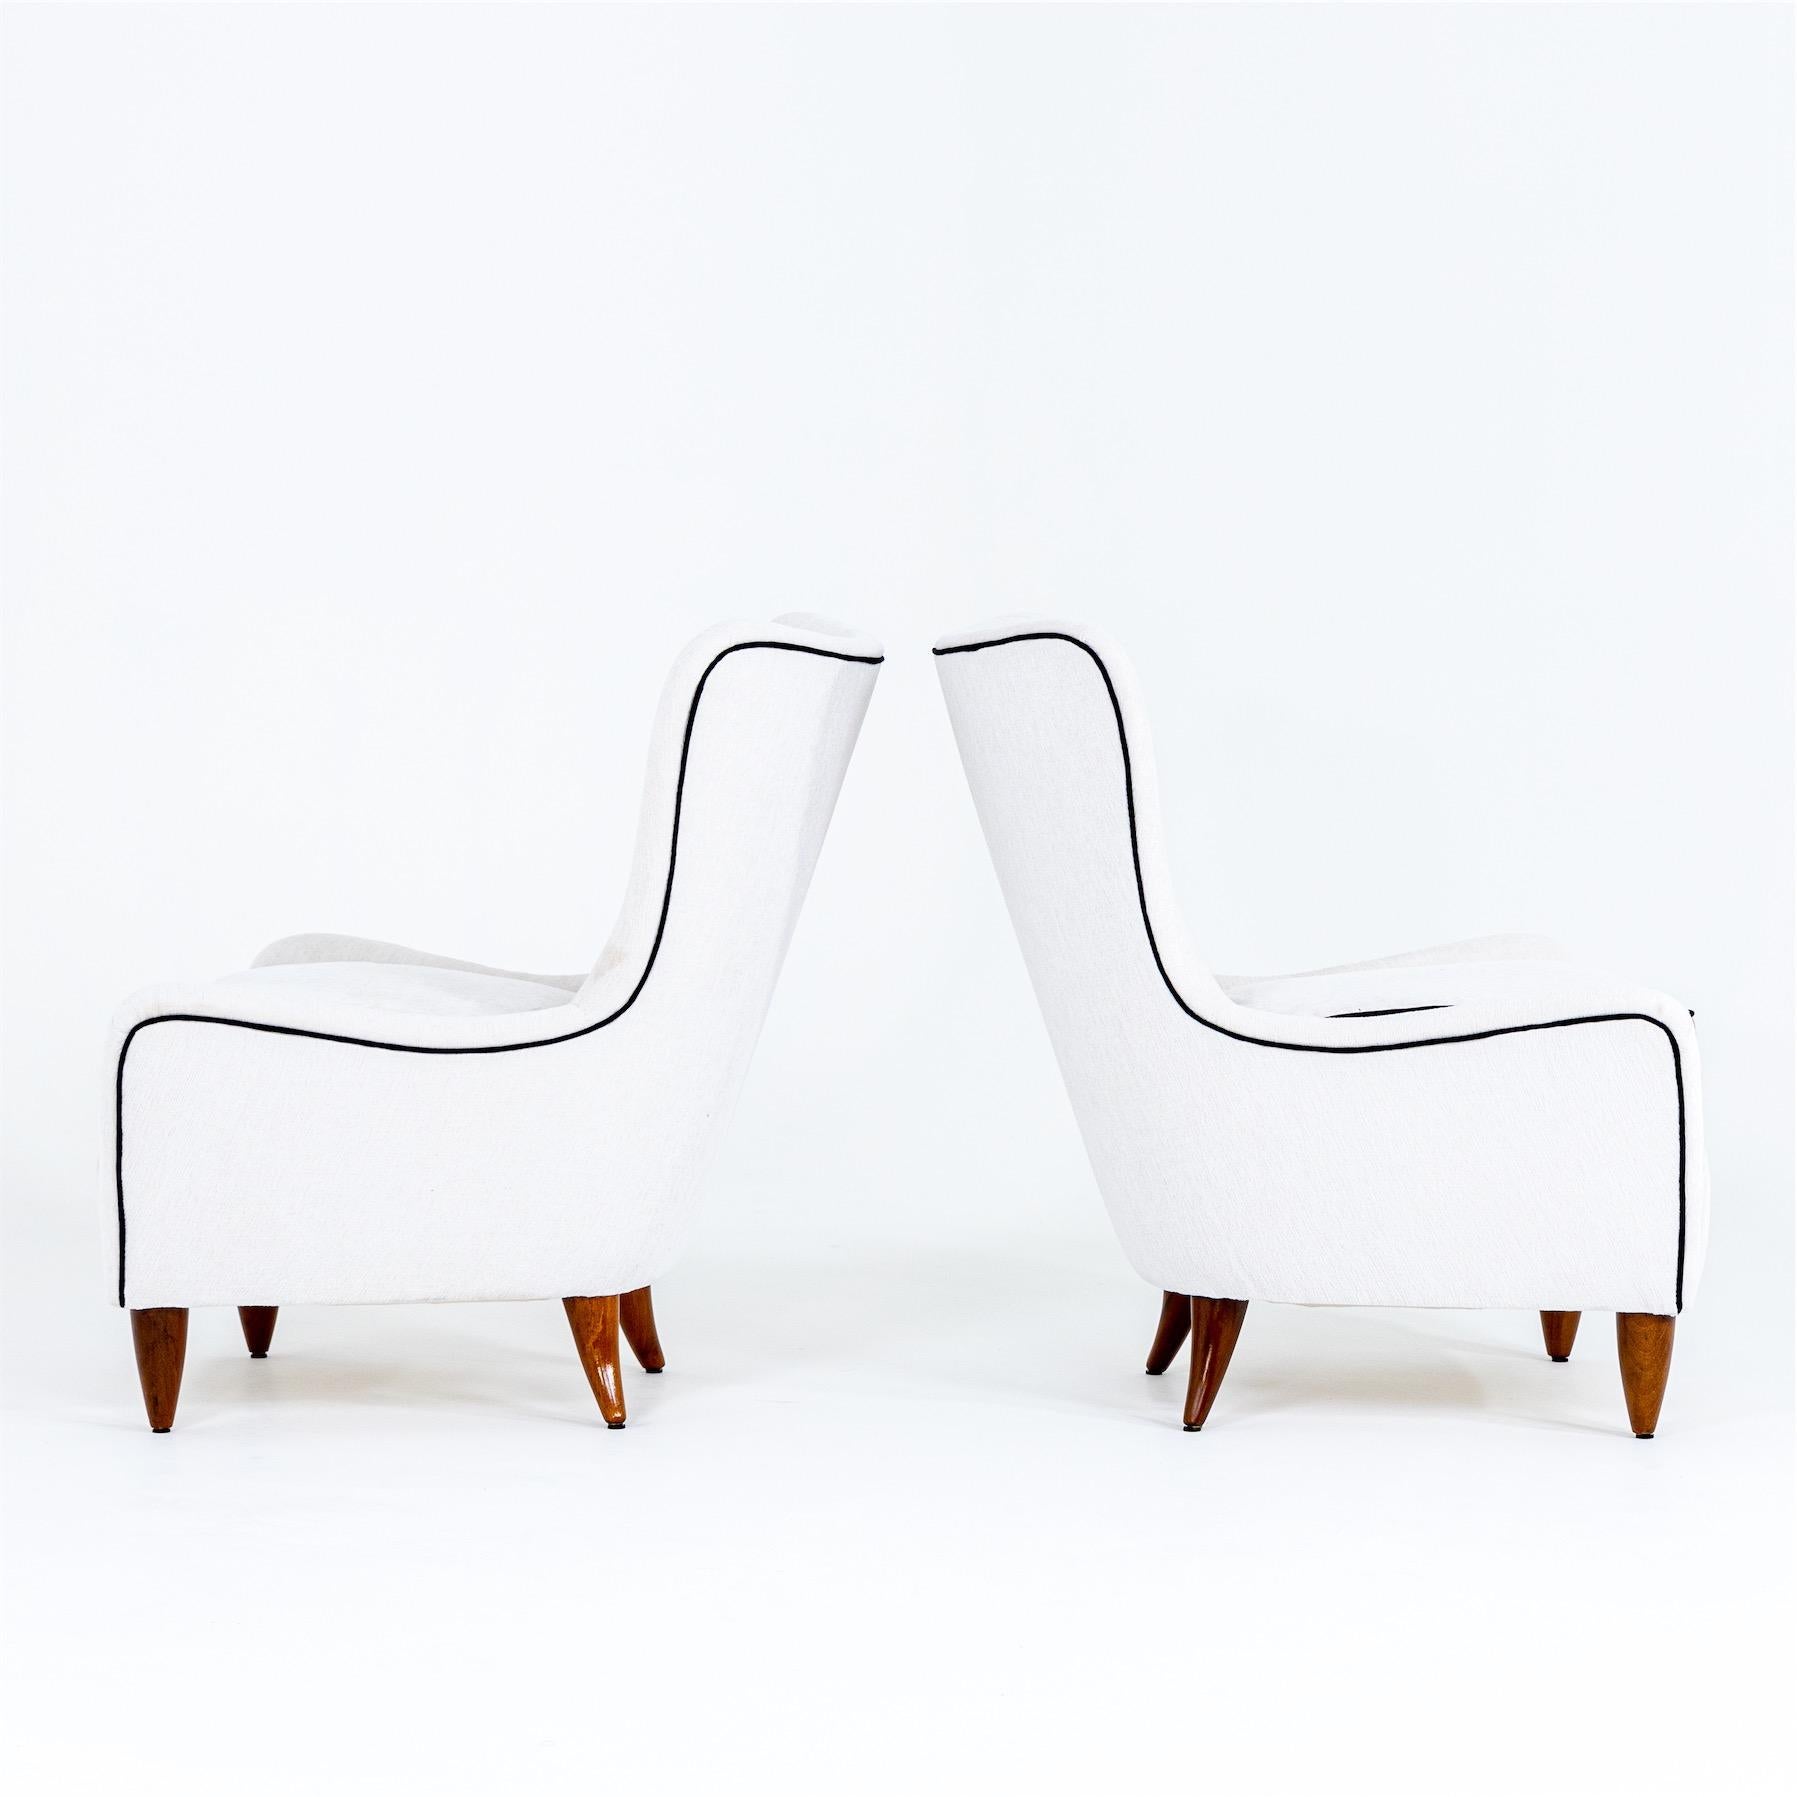 Lounge Chairs by Brambilla, Italy, 1950s For Sale 1